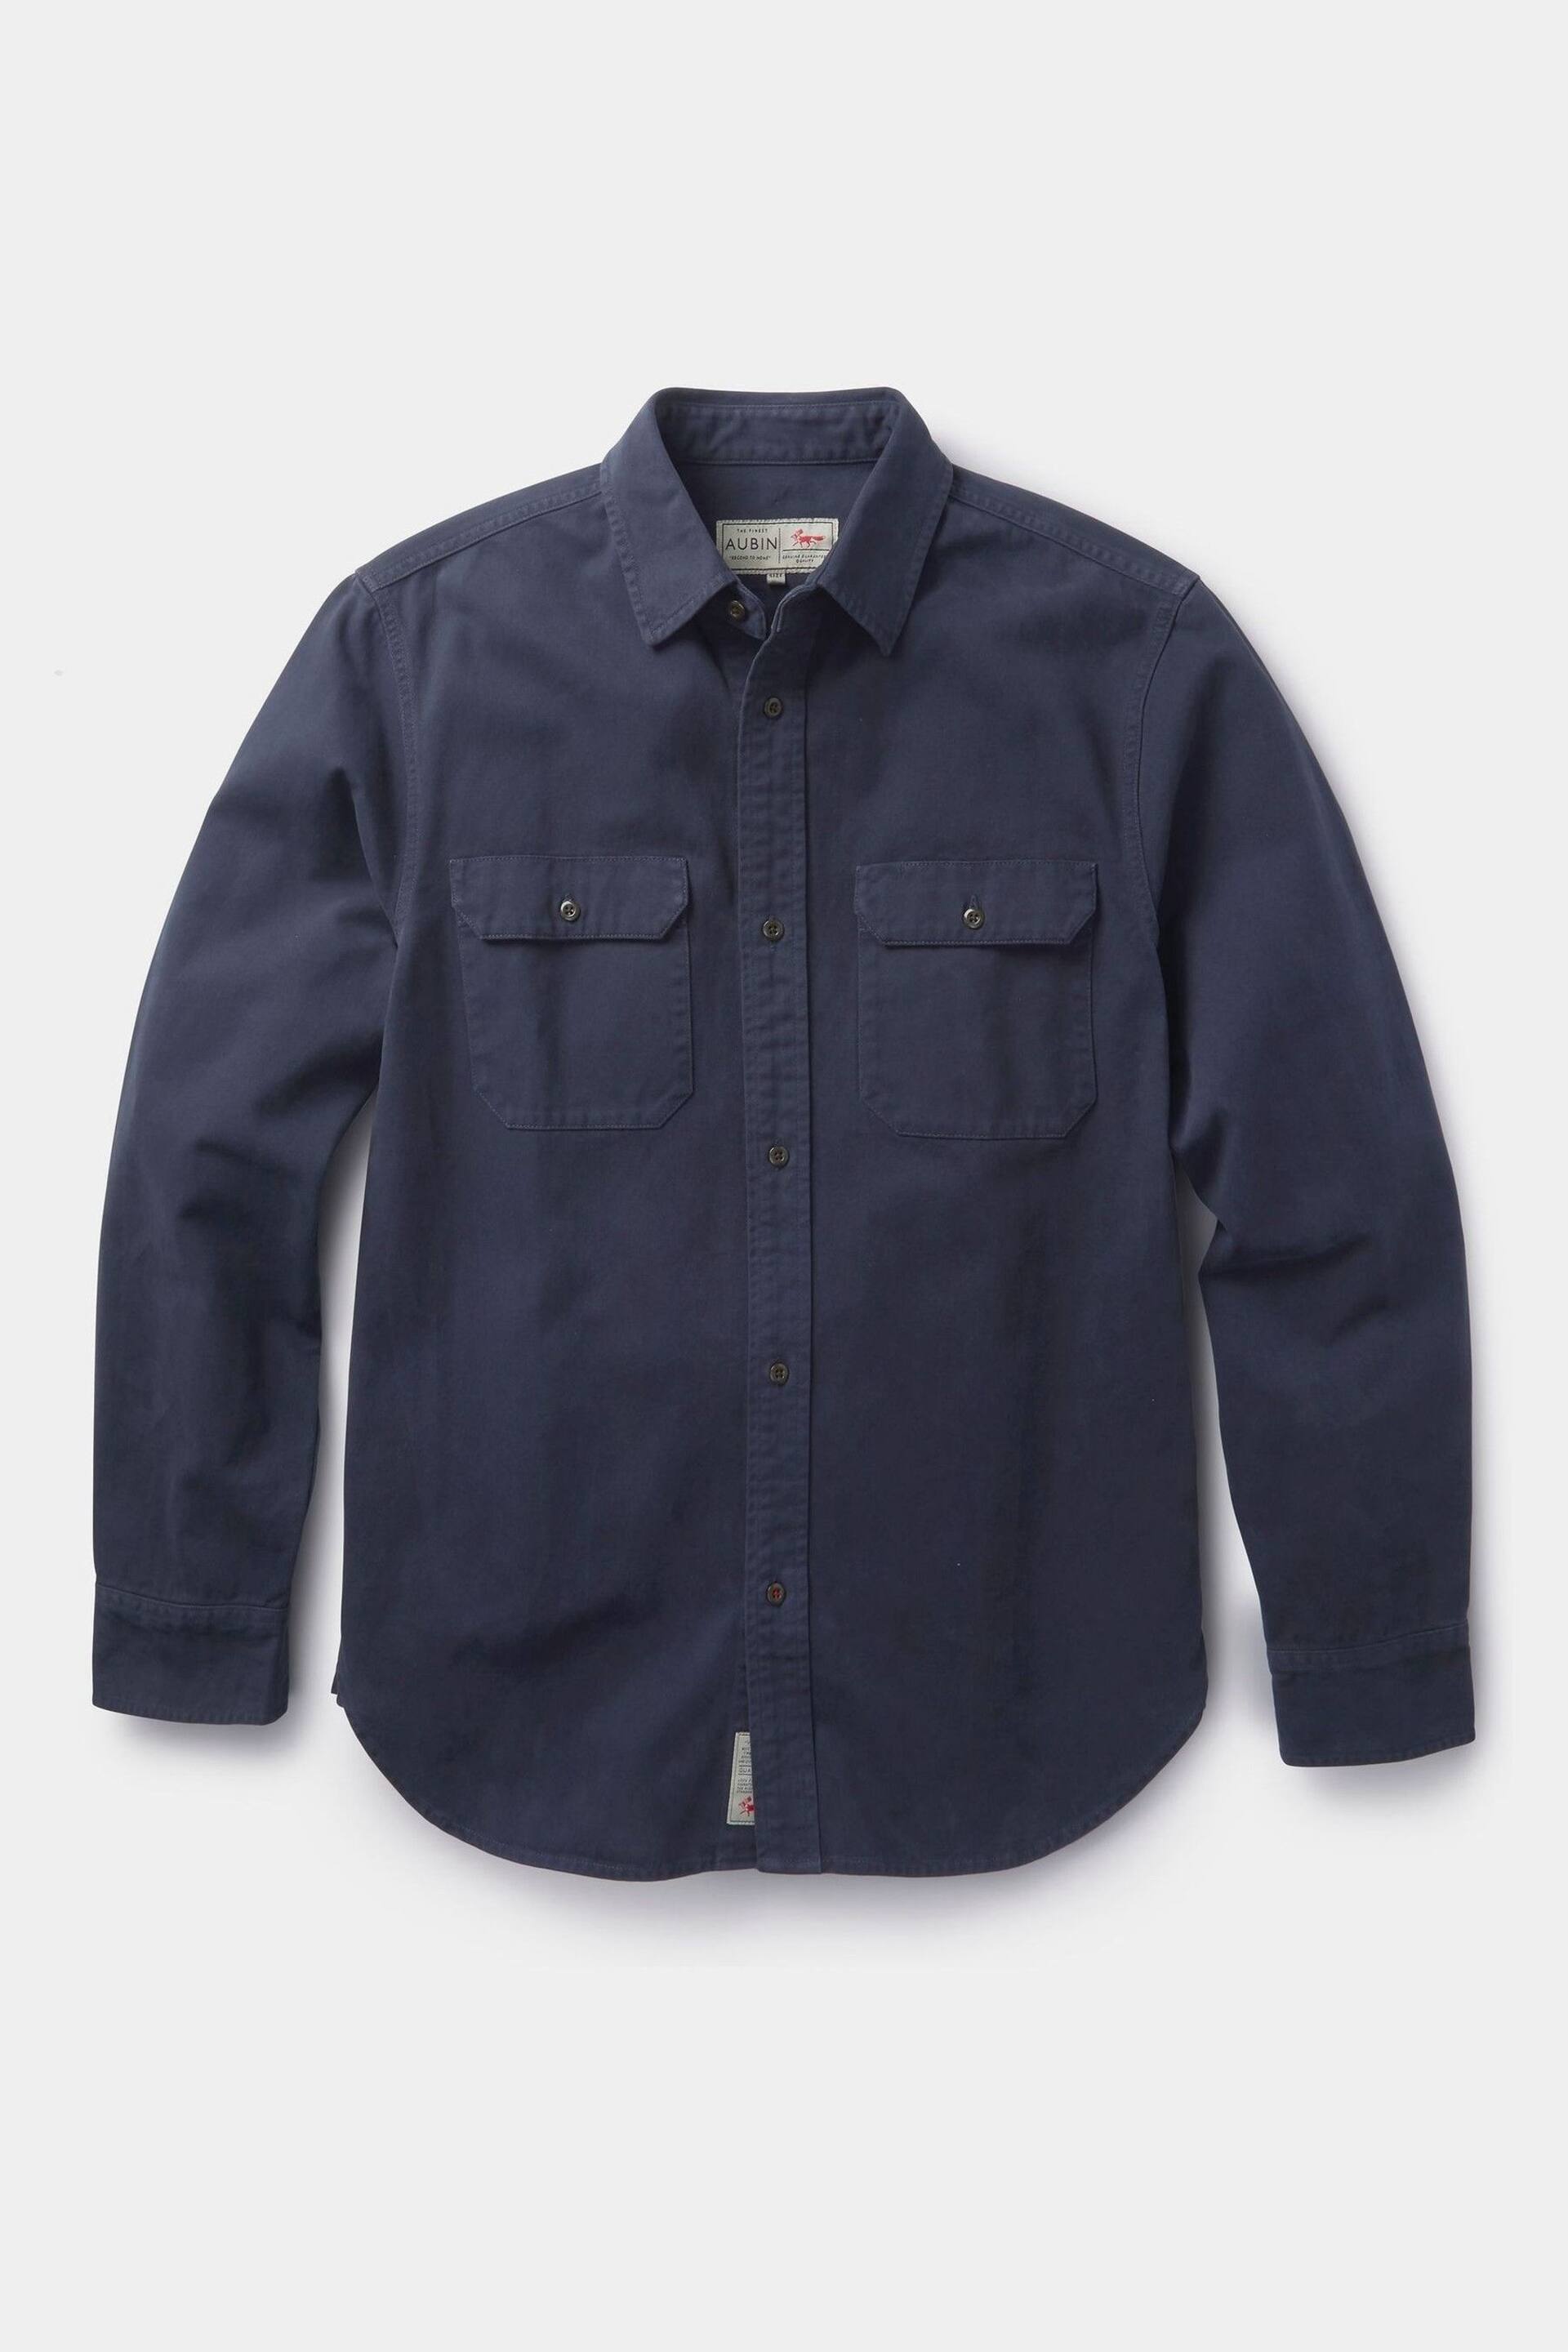 Aubin Normanby Cotton Twill Shirt - Image 4 of 5